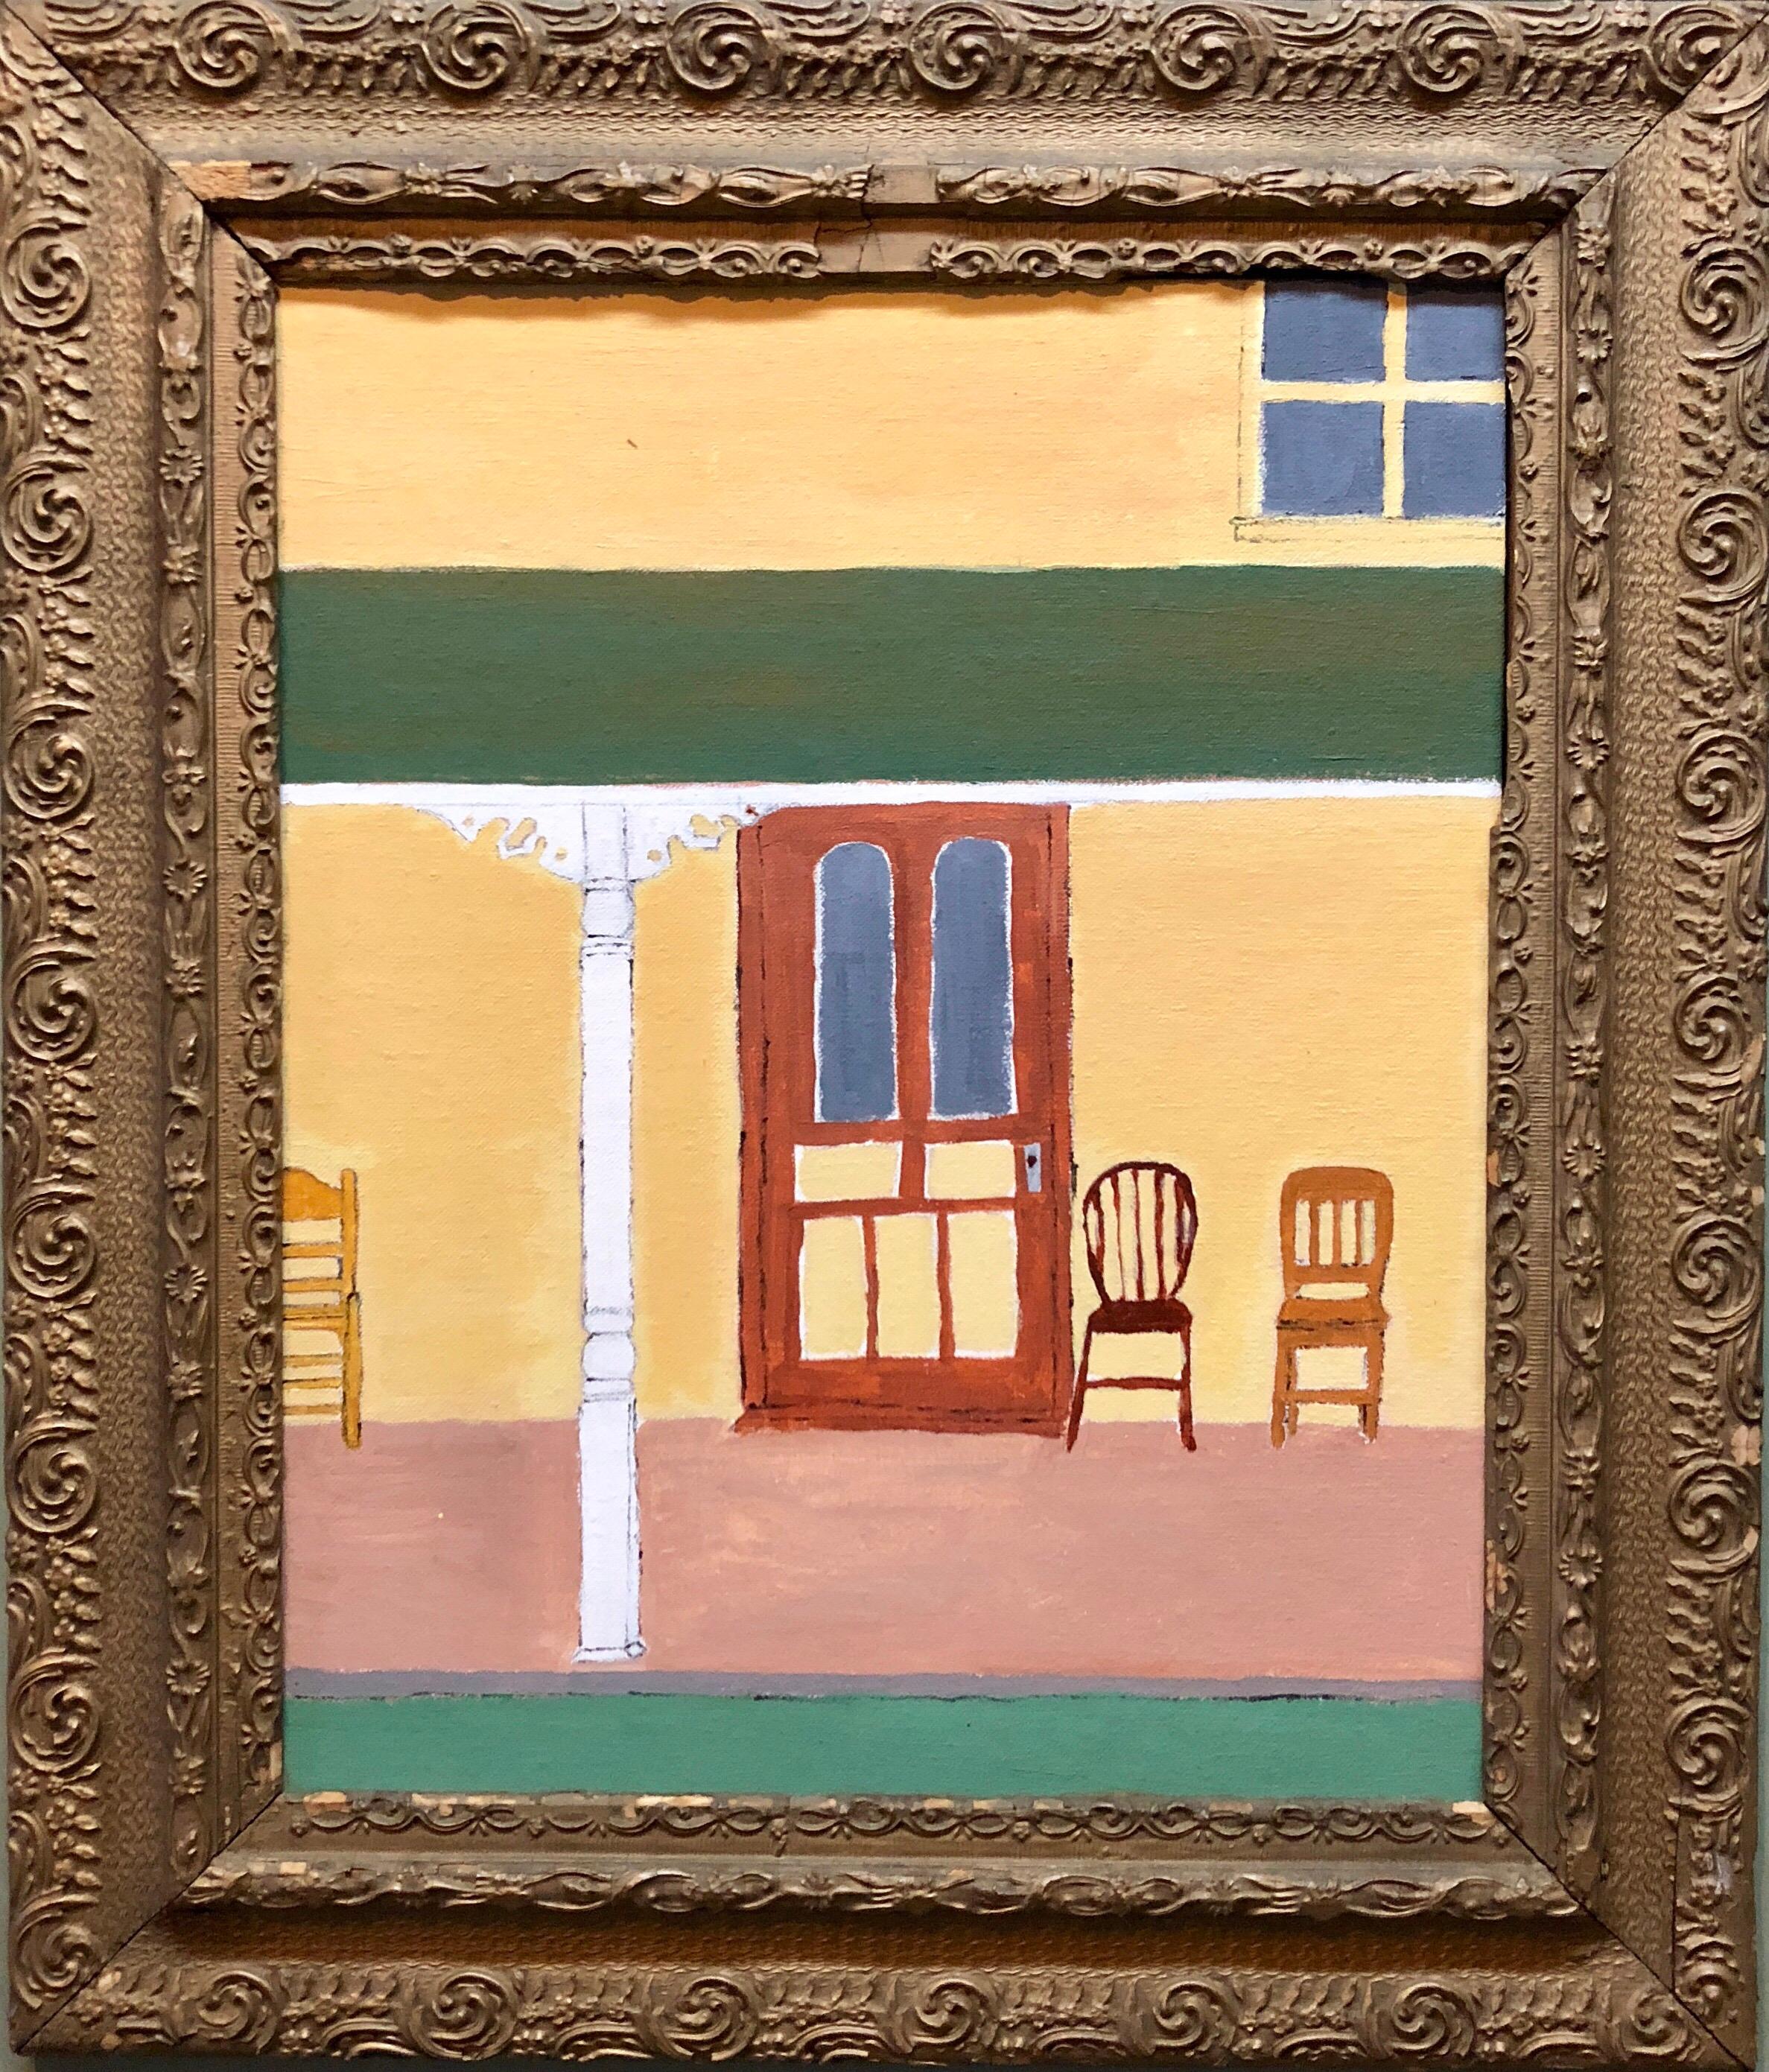 Gretchen Dow Simpson Figurative Painting - New Yorker Magazine Cover Oil Painting New England Porch View Folk Art Americana